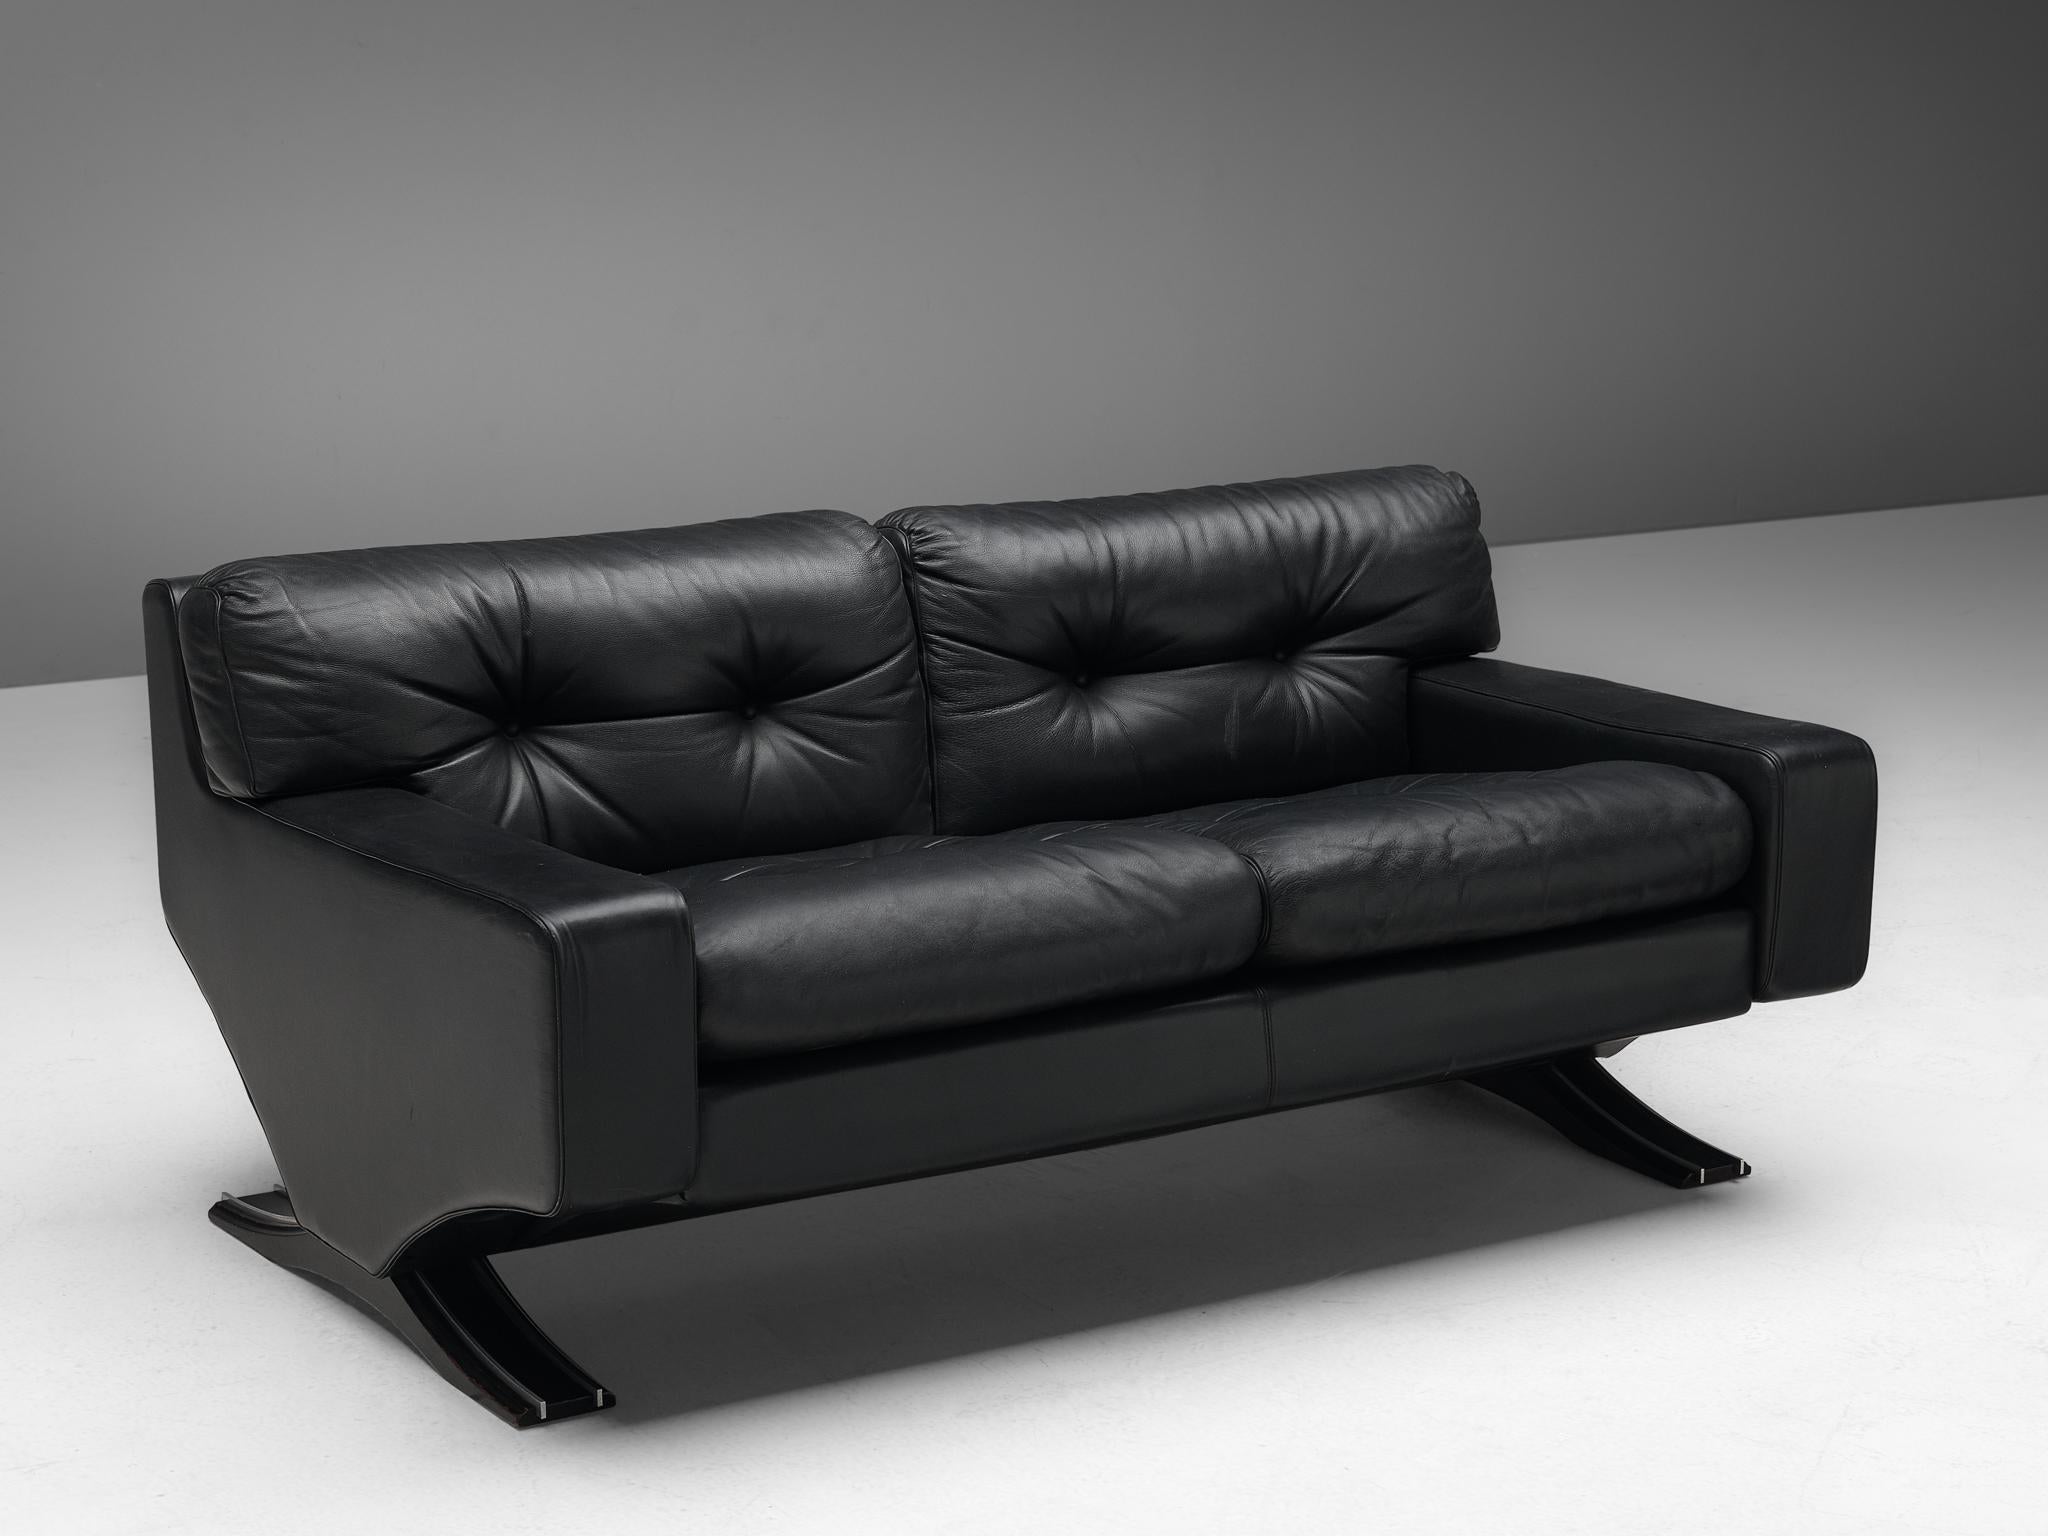 Franz T. Sartori for Flexform, two-seat sofa, leather, lacquered wood and chrome, Italy, 1970s.

Bulky and lush sofa in leather of Italian origin. This great is by design by the Italian sculptor Franz T. Sartori. The sofa has a strong appearance due